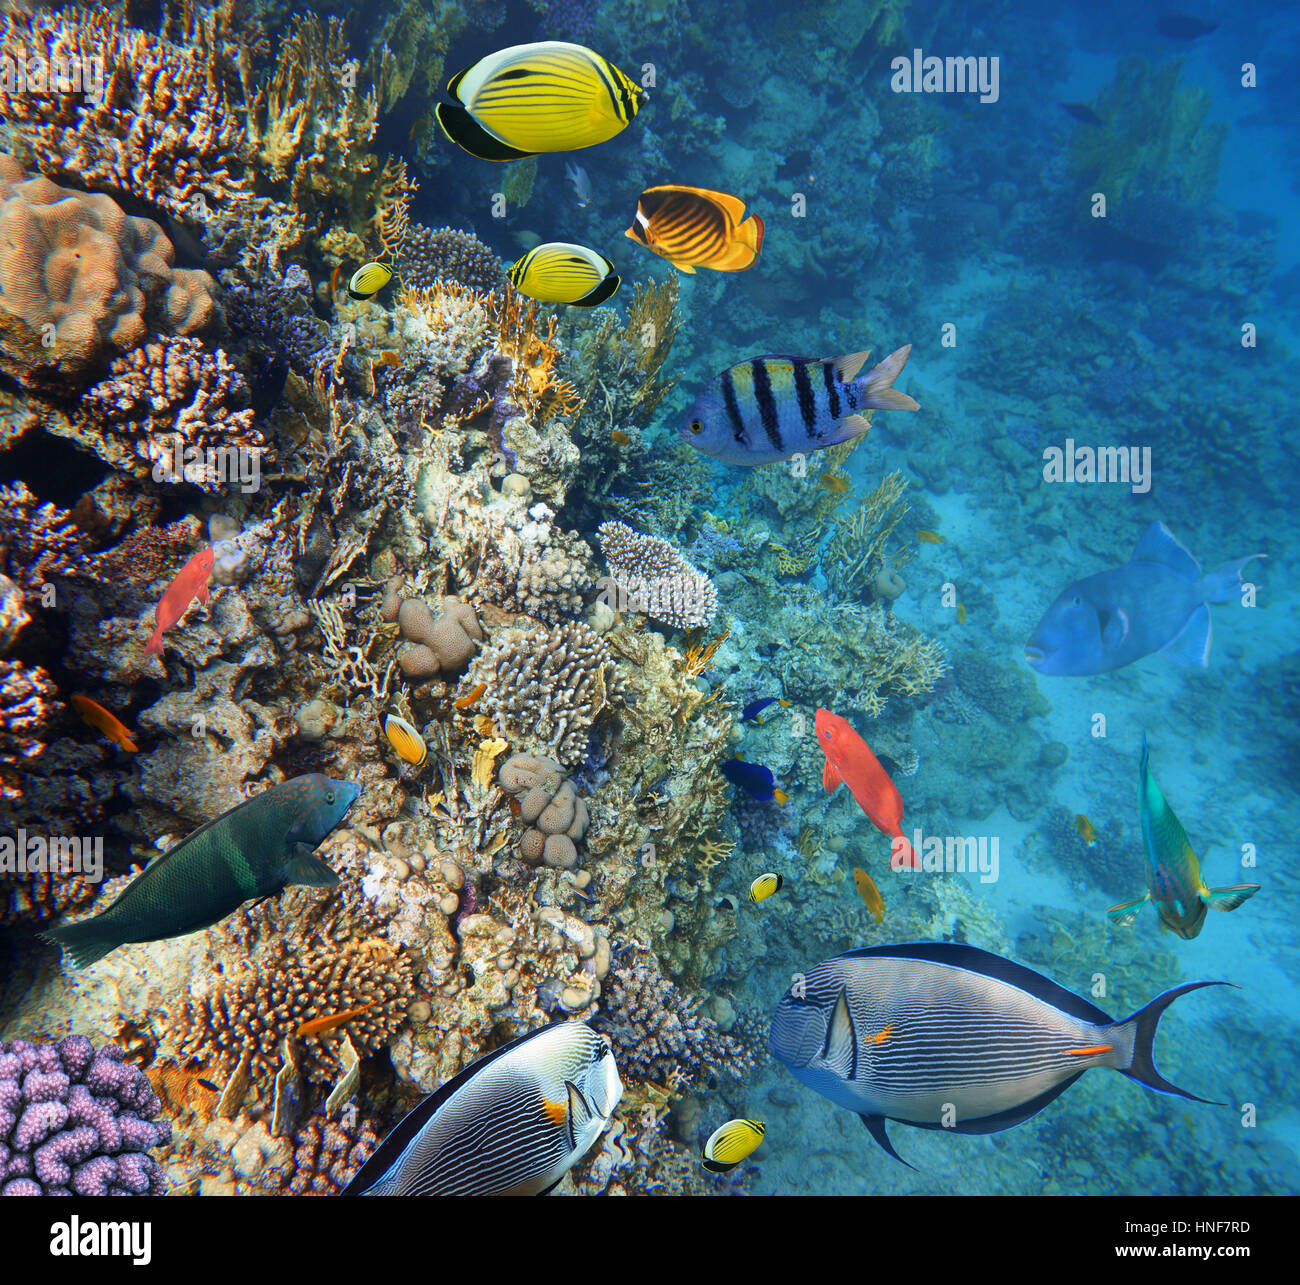 Colorful coral reef fishes of the Red Sea. Stock Photo